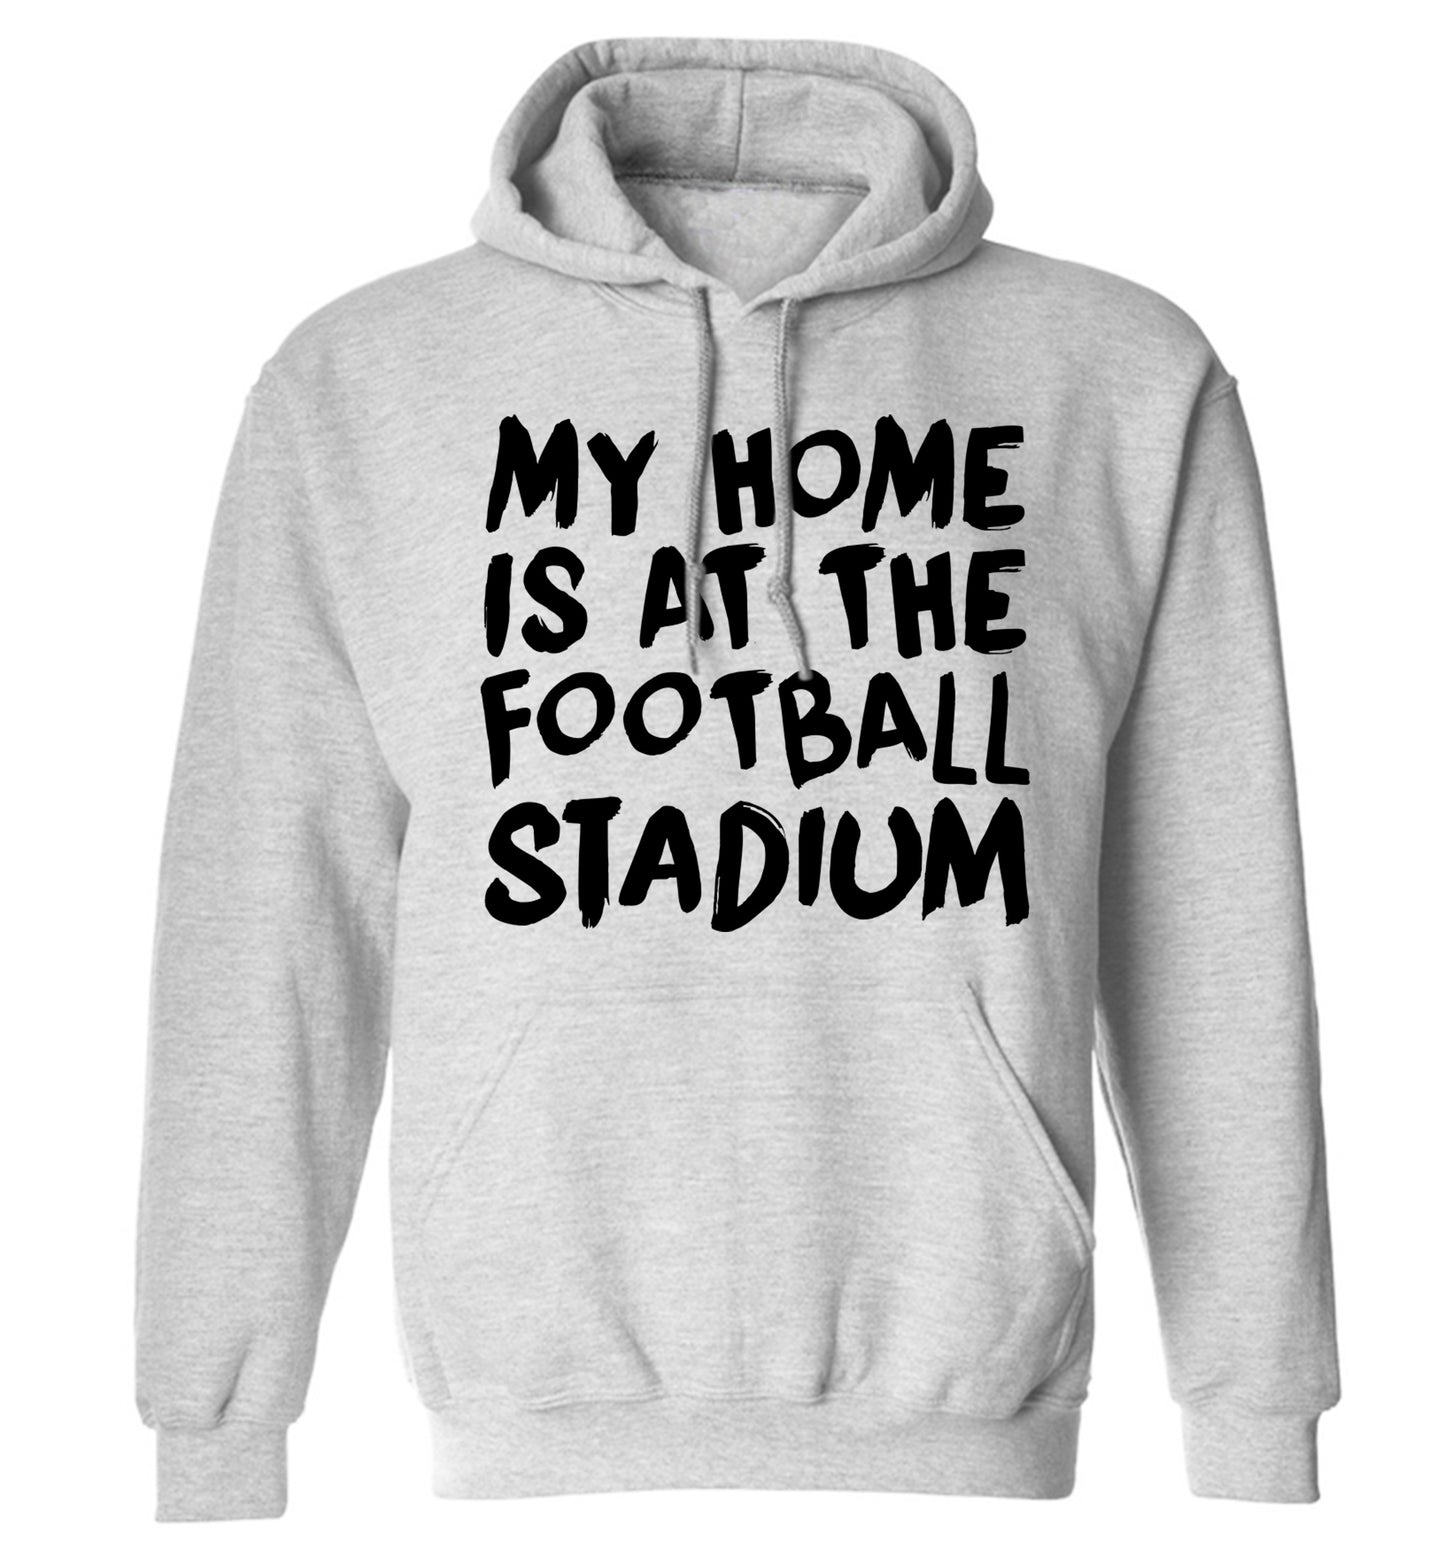 My home is at the football stadium adults unisex grey hoodie 2XL